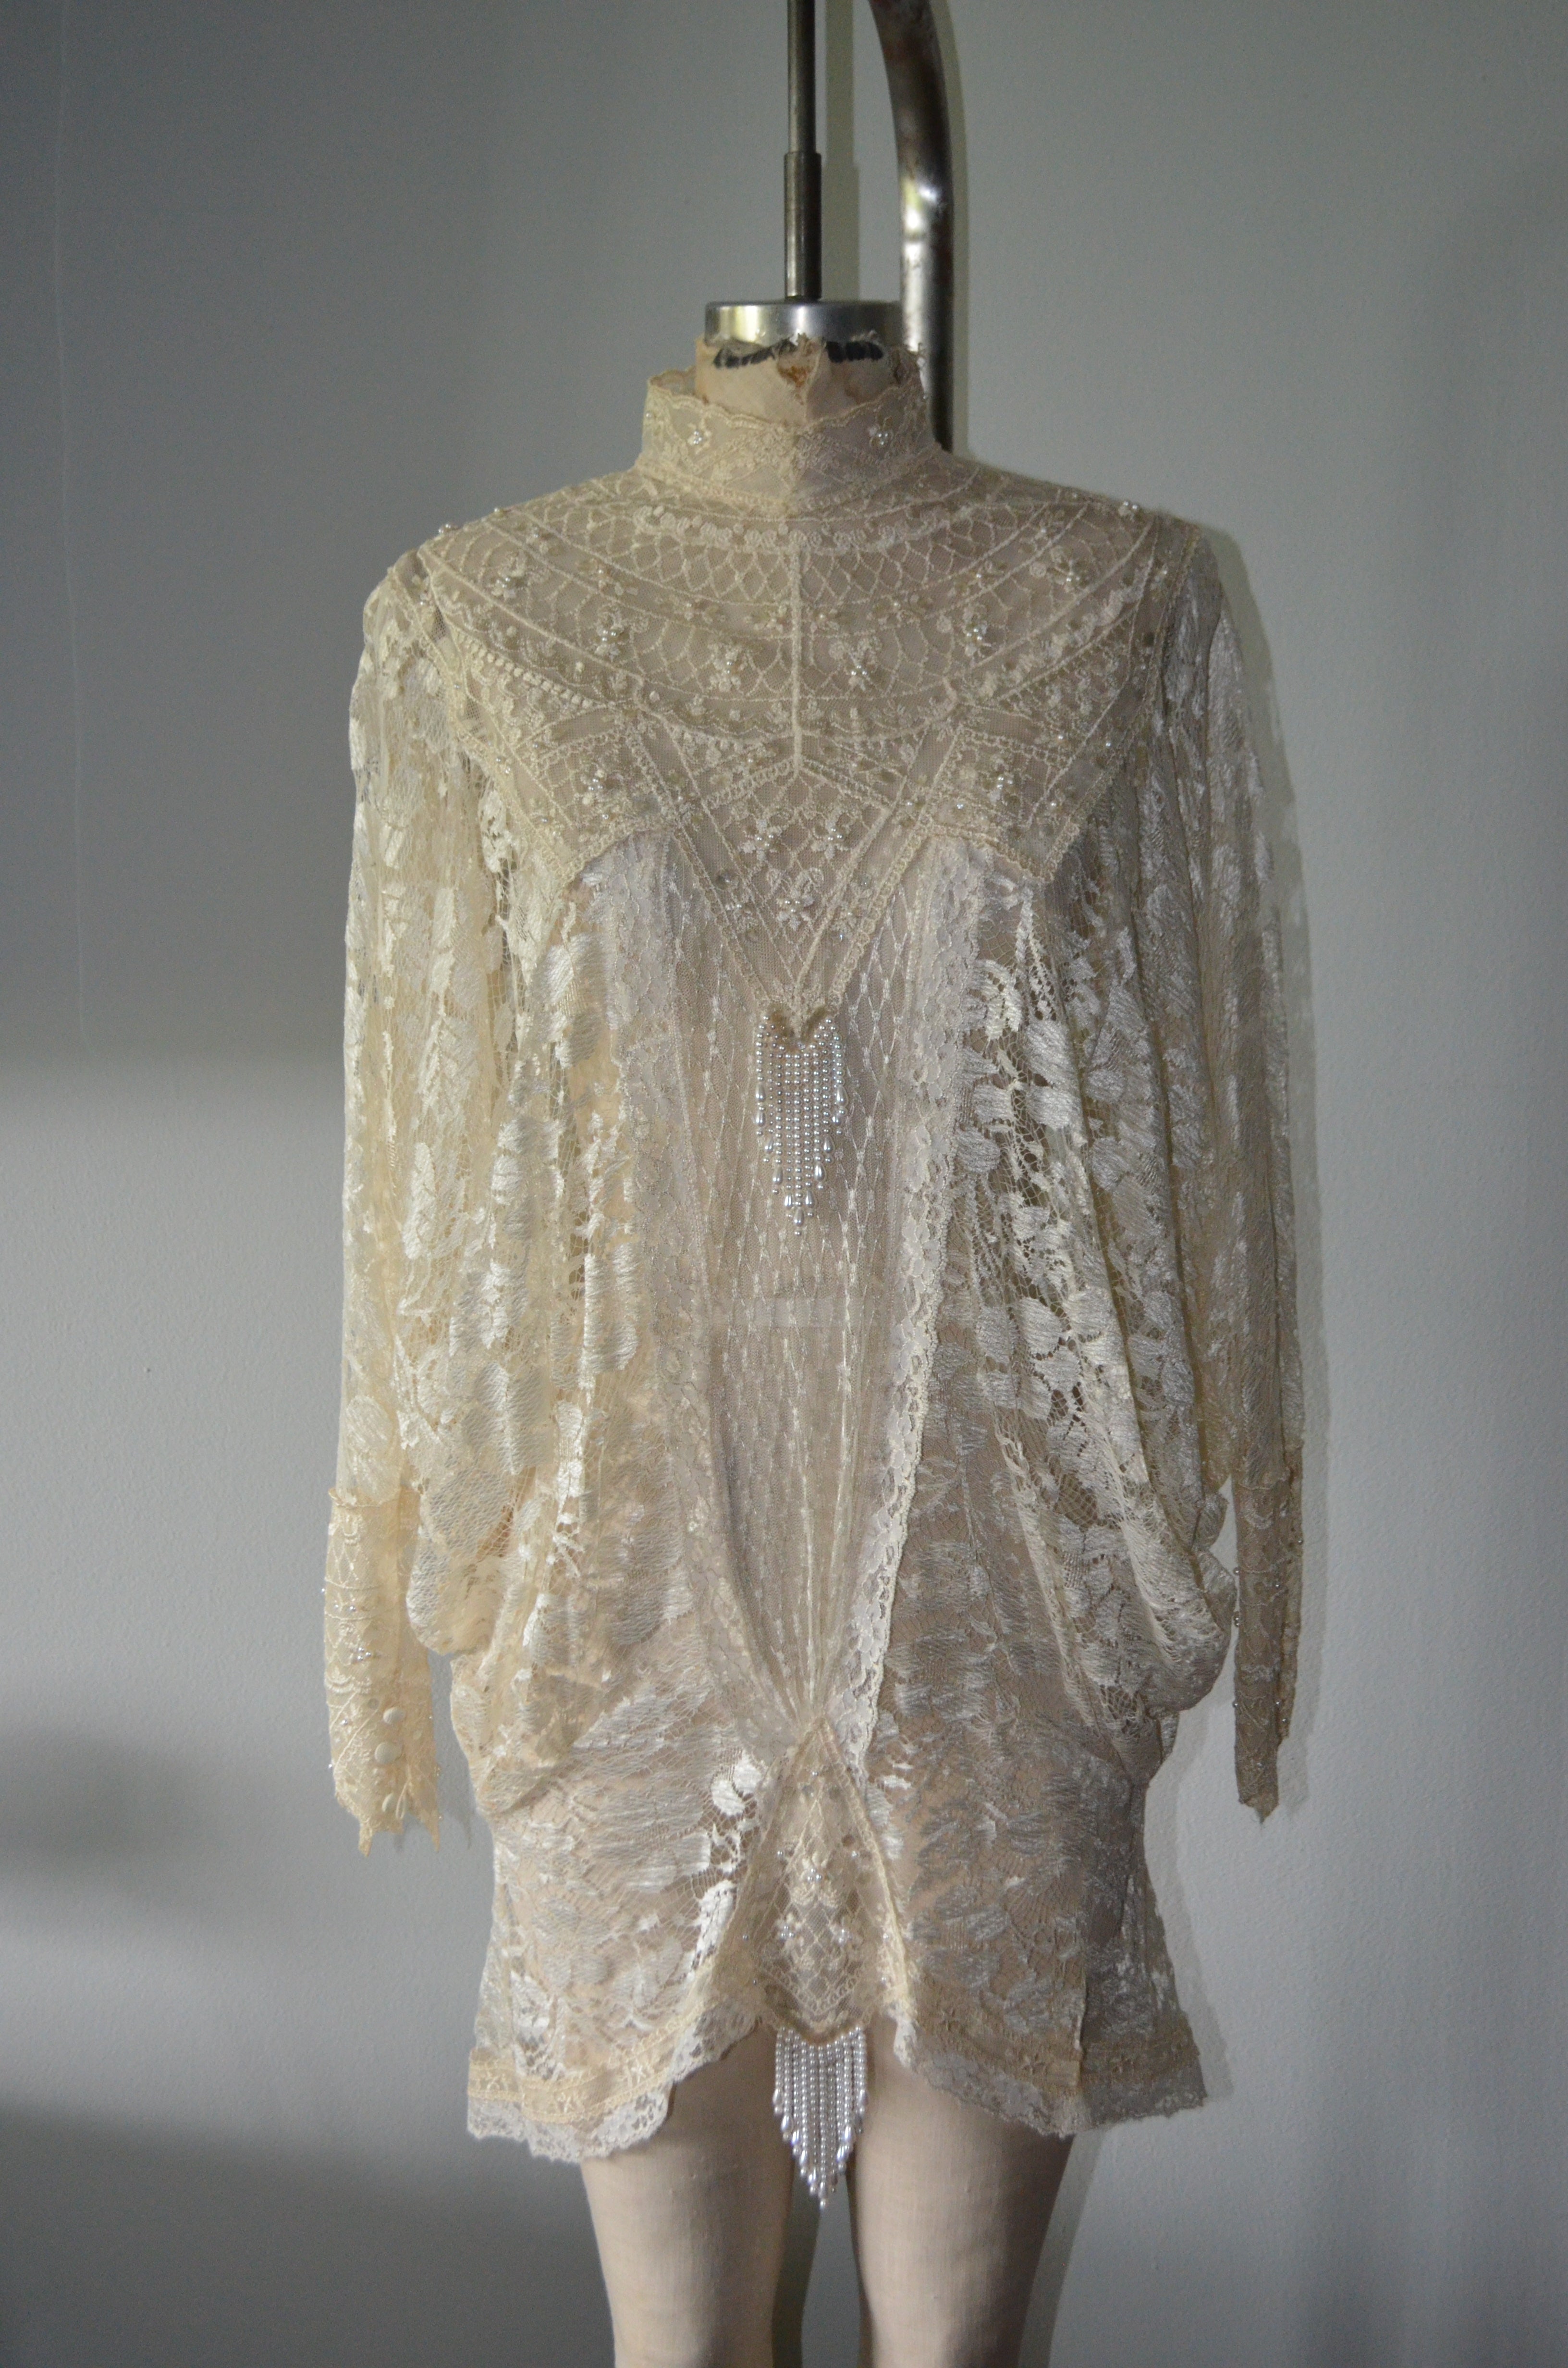 Victorian Sequin Beaded Pearl Sheer Lace Cover up Capelet Batwing Sleeve Dress